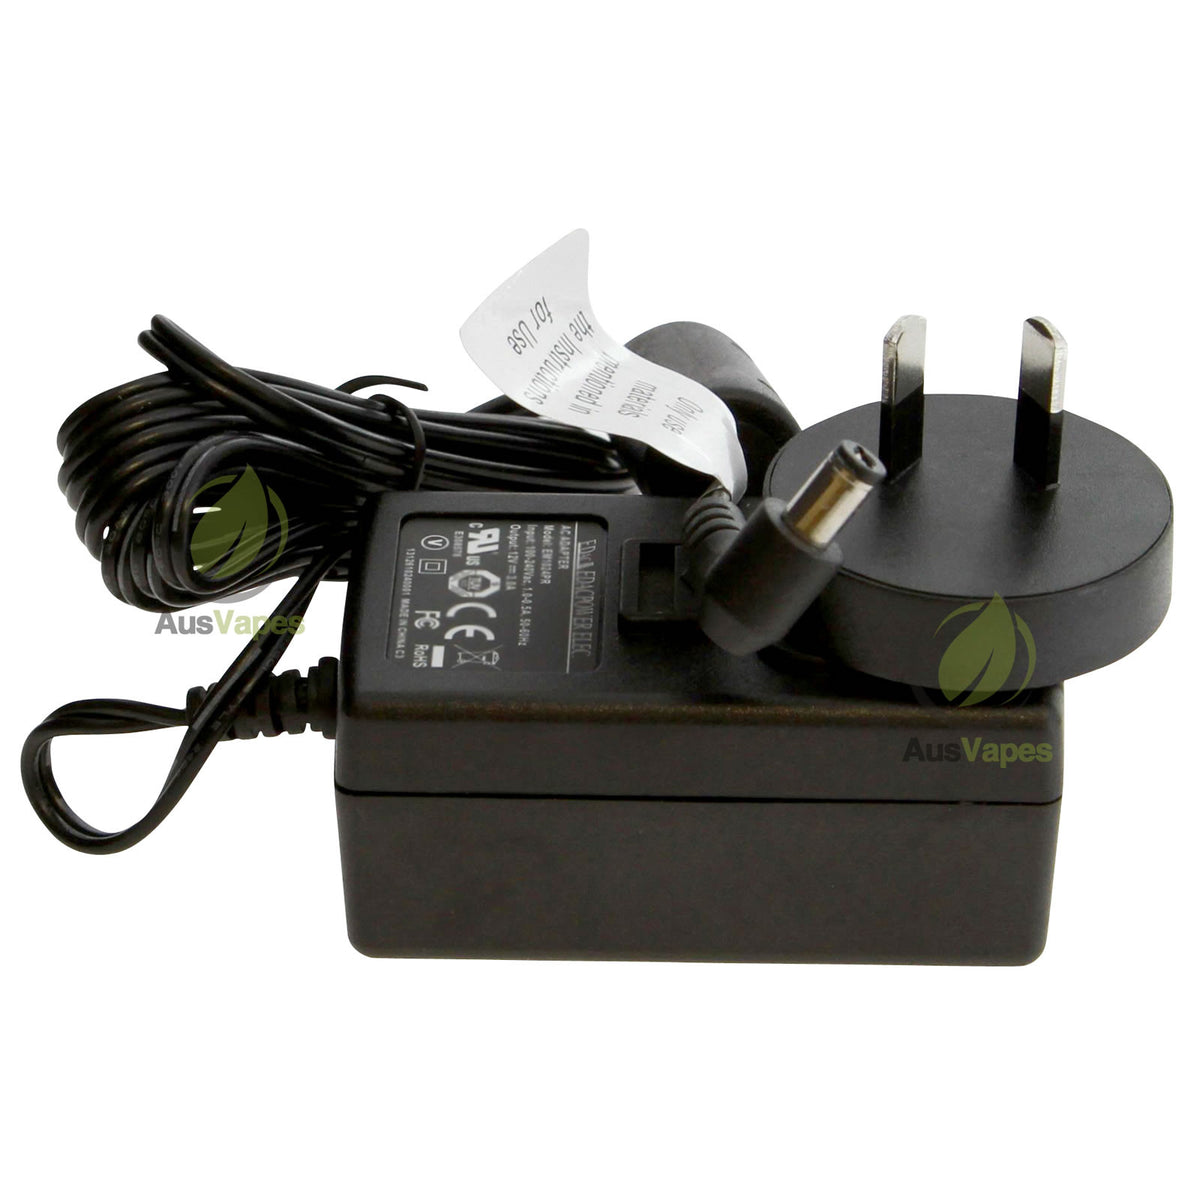 Mighty Vaporizer Charger